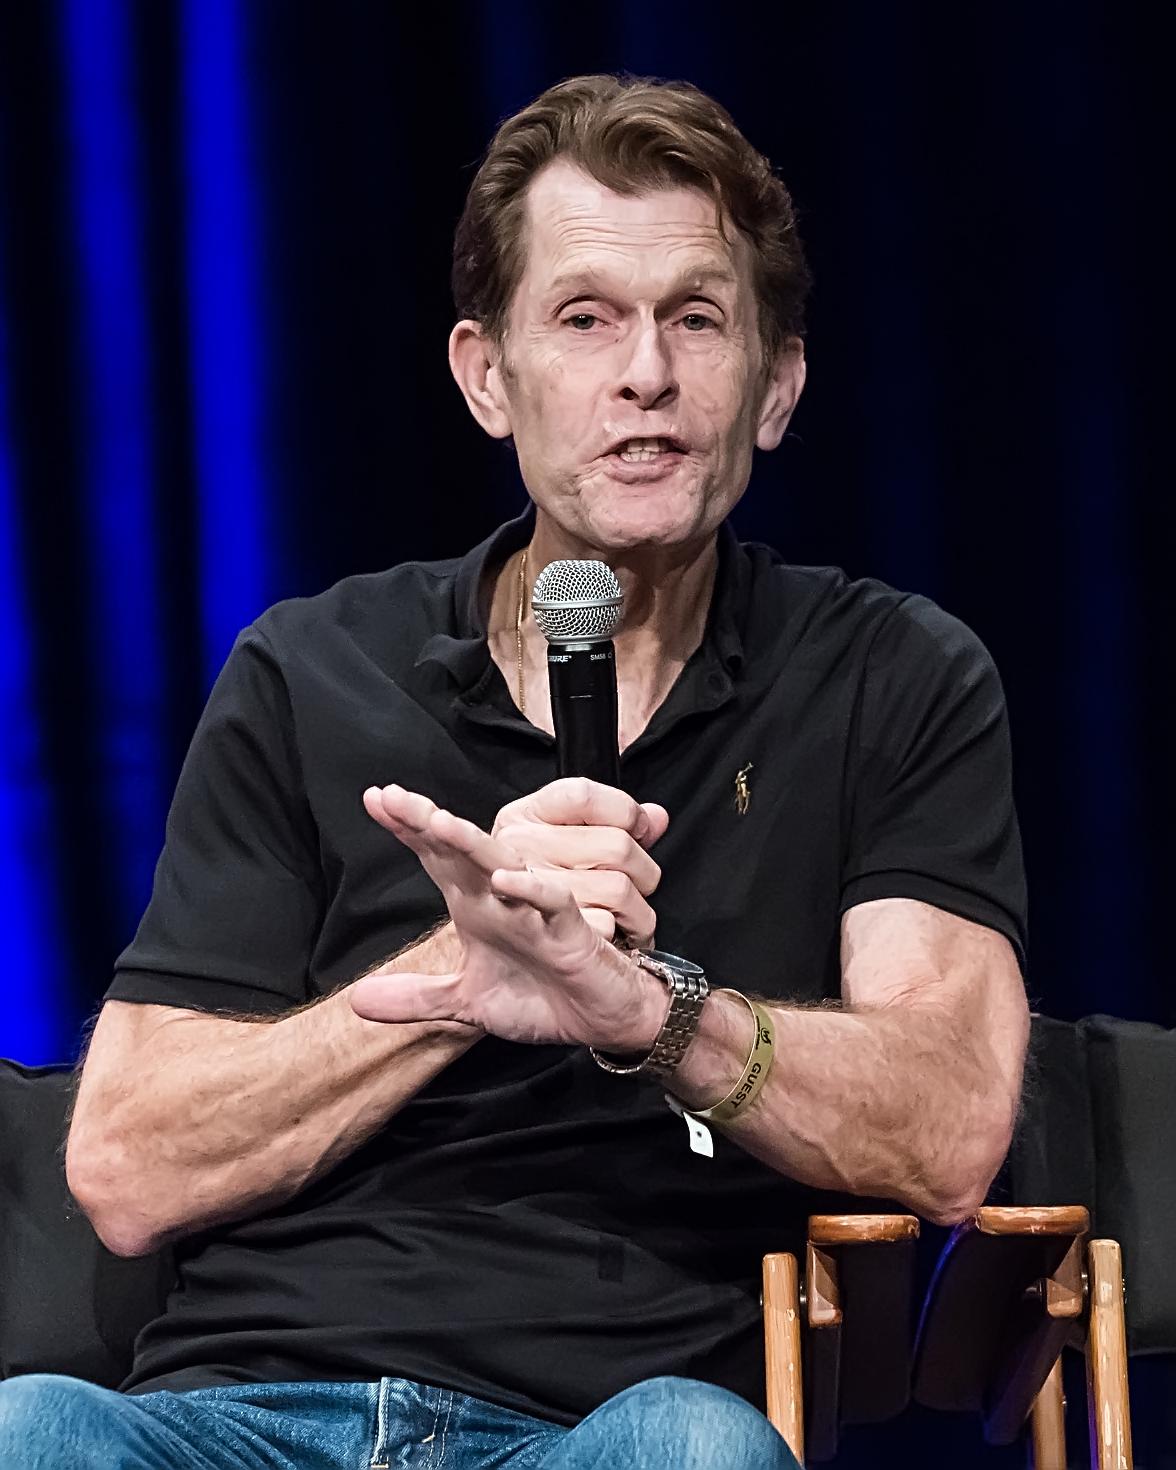 Kevin Conroy, voice of Batman, has died at the age of 66